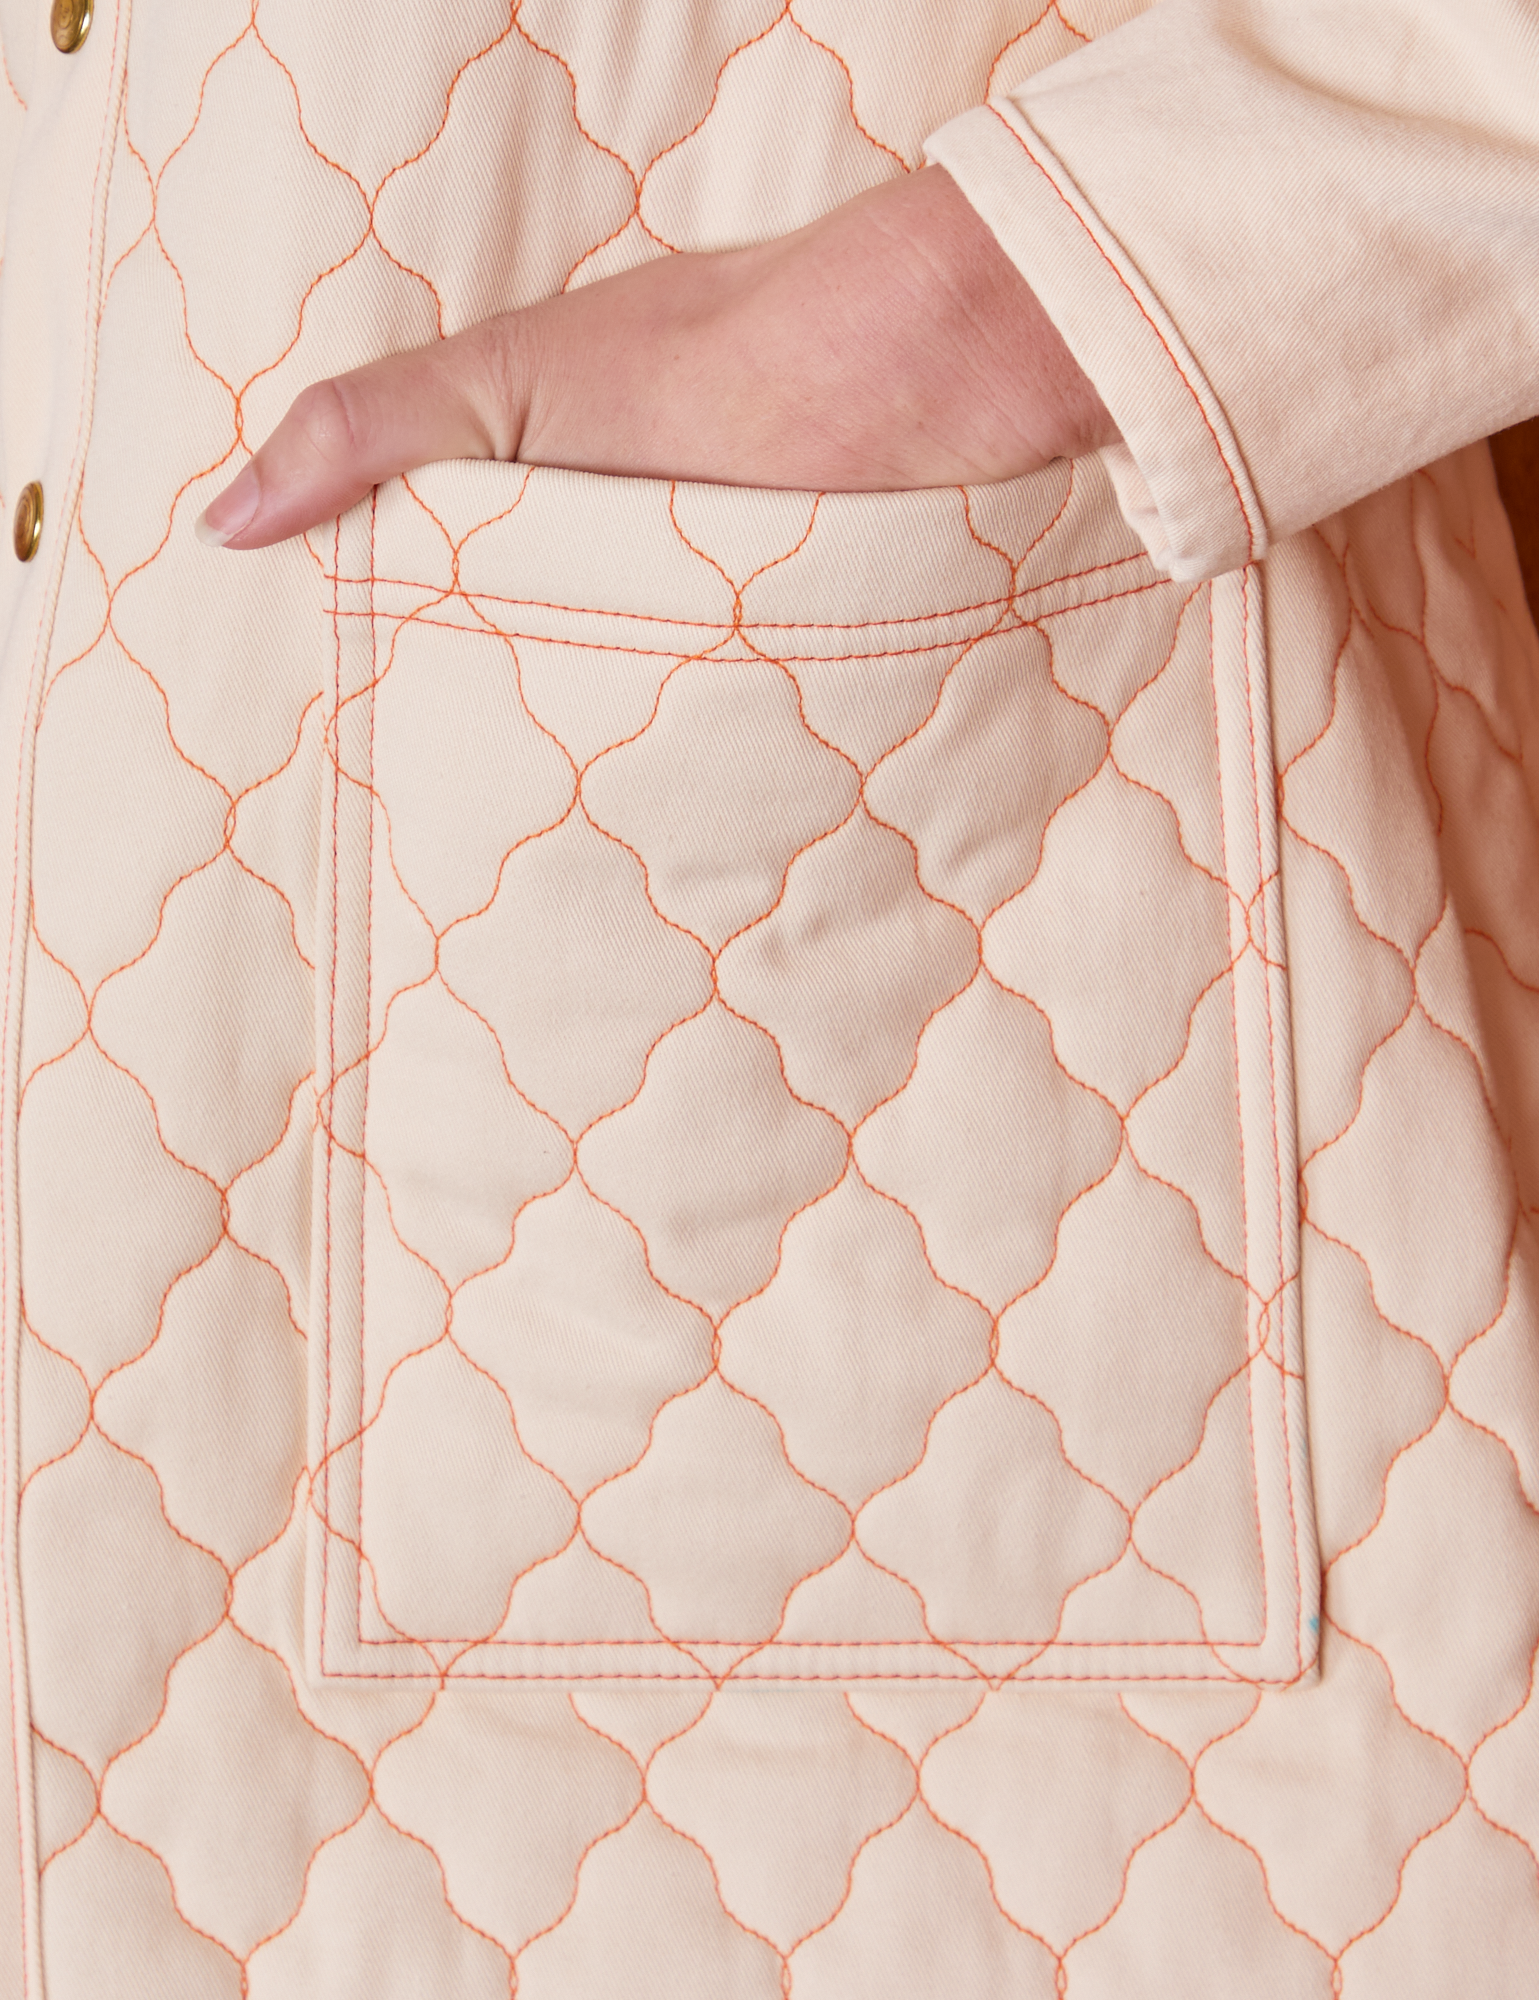 Quilted Overcoat in Vintage Off-White pocket close up with Alex&#39;s hand in the pocket